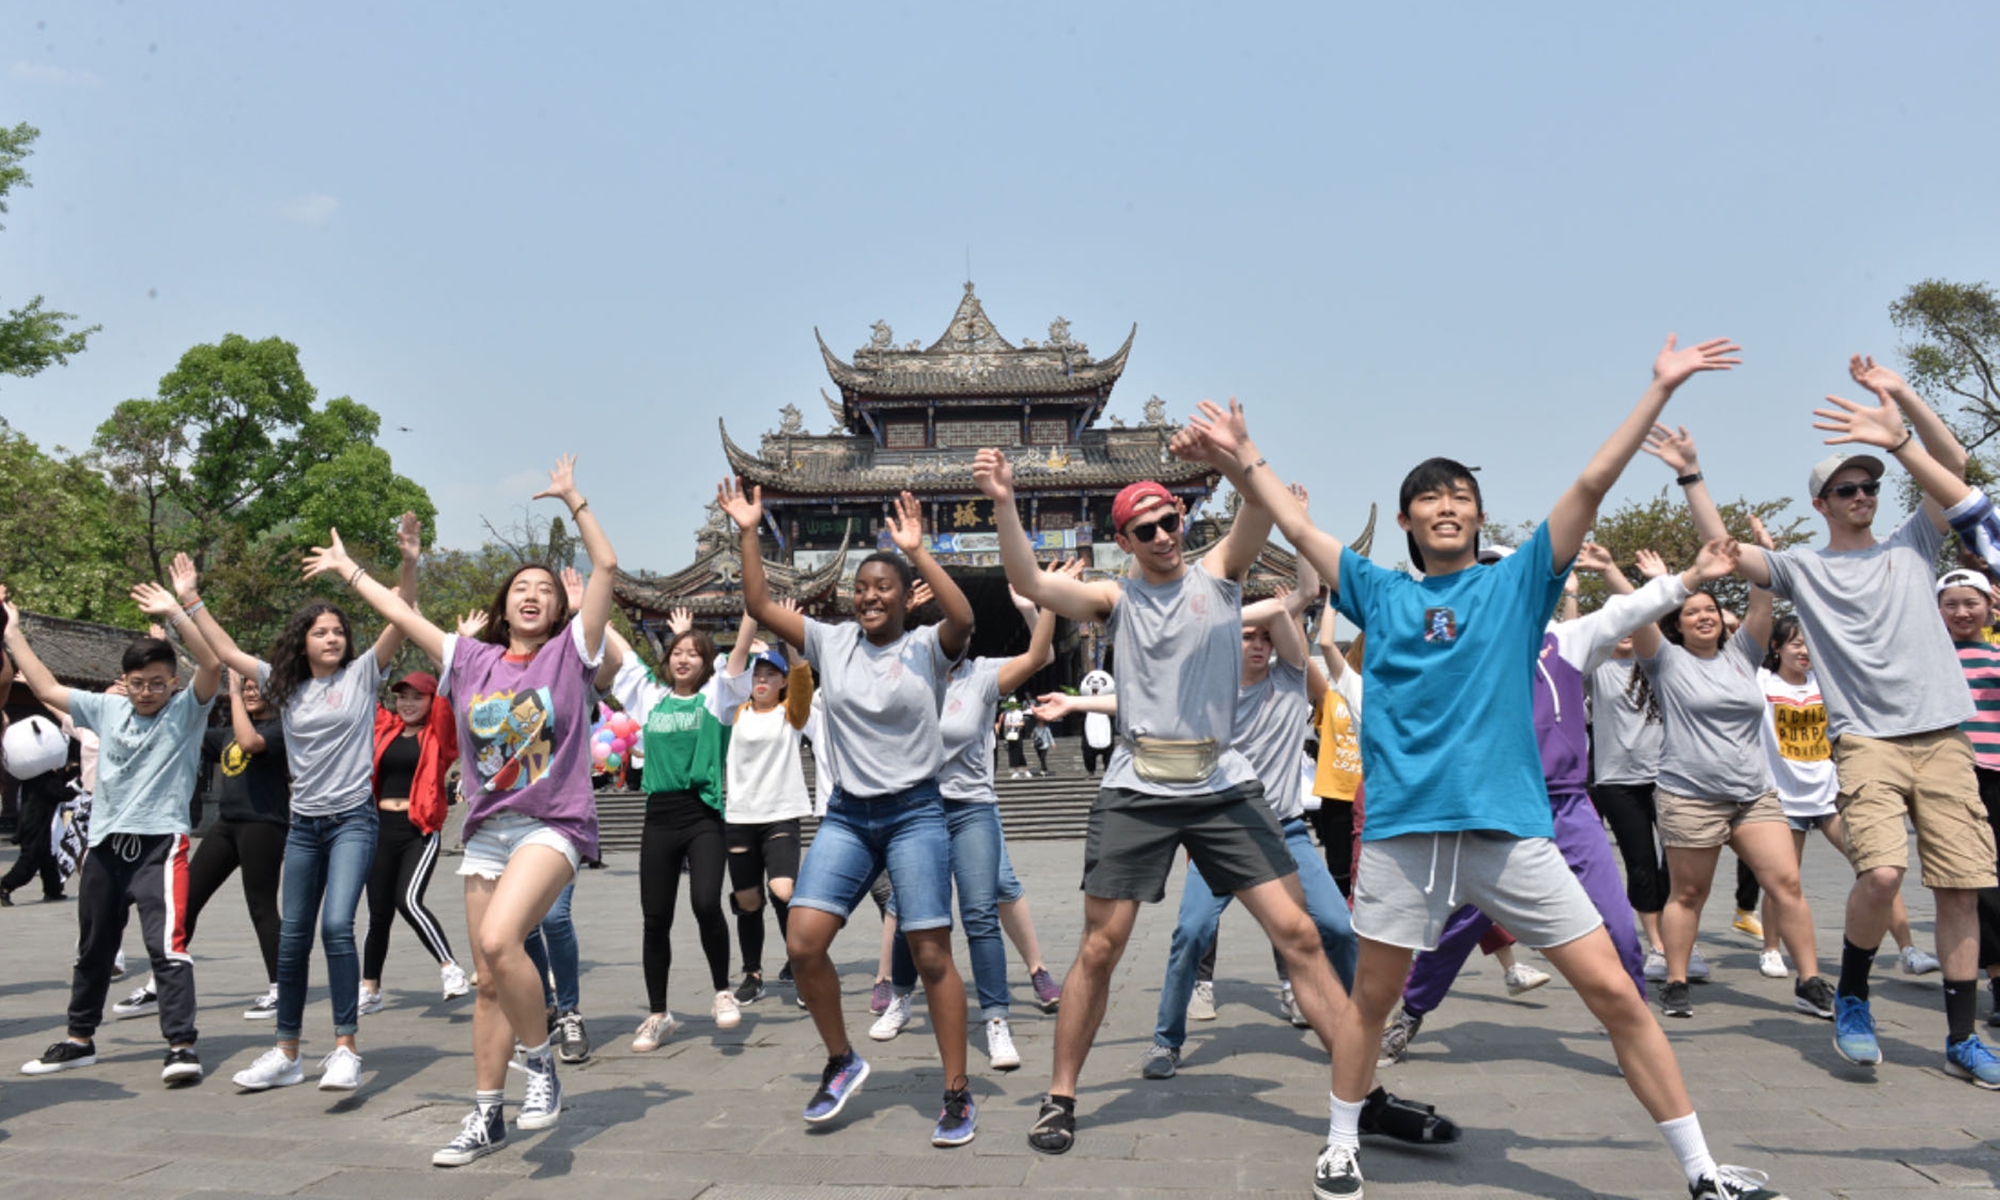 Students from Lincoln High School perform a flash mob dance with local students during a visit to Dujiangyan, Southwest China's Sichuan Province in 2018. Photo: Courtesy of David Chong